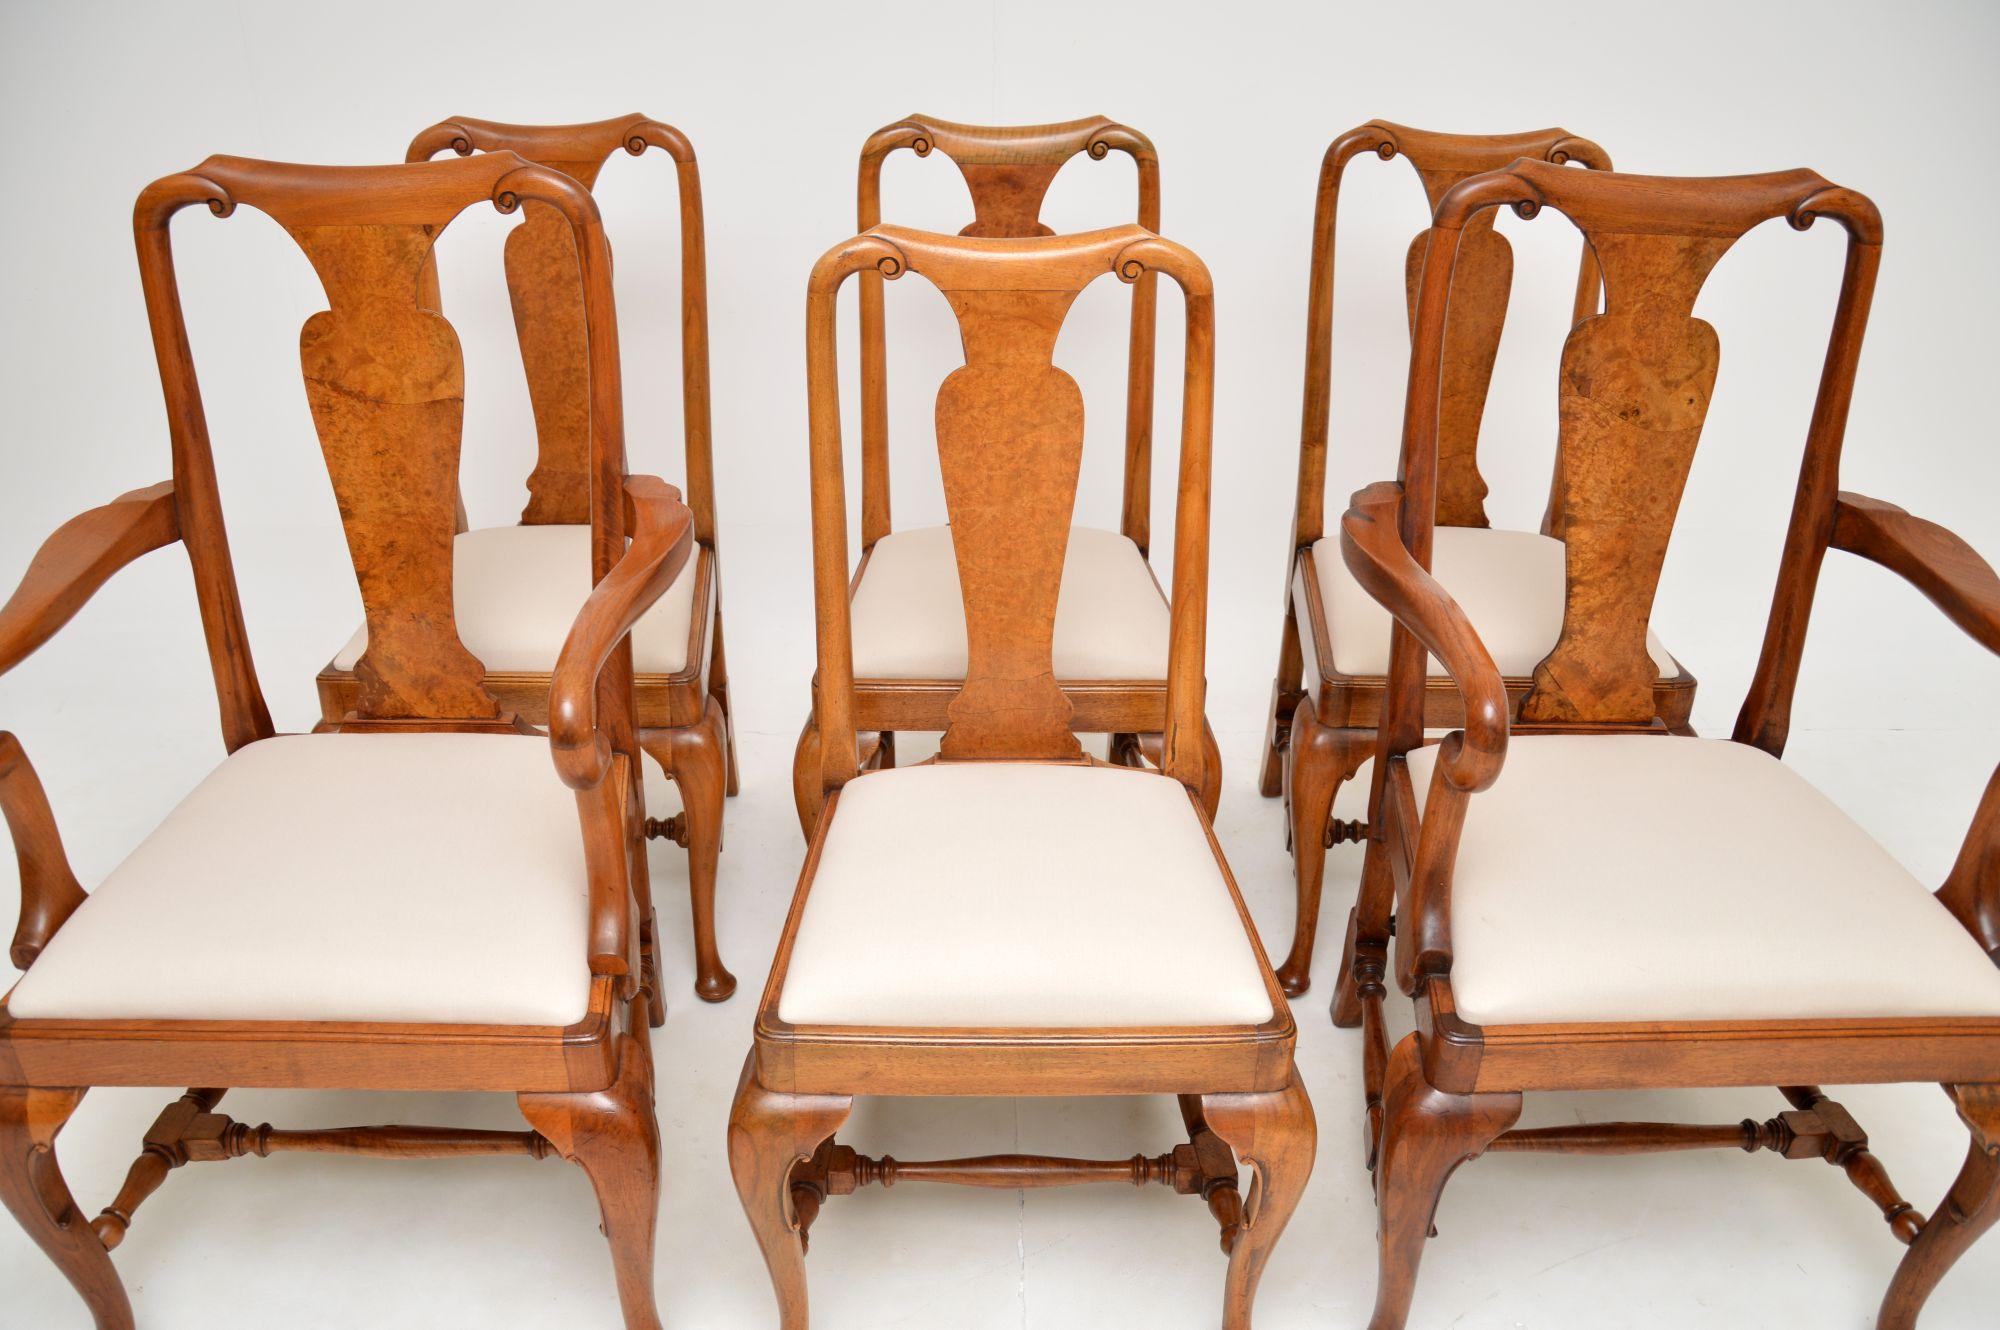 A fantastic set of six antique walnut dining chairs in the Queen Anne style. They were made in England, and they date from around the 1900-1910 period.

The quality is outstanding, they are extremely well made and beautifully designed. They have